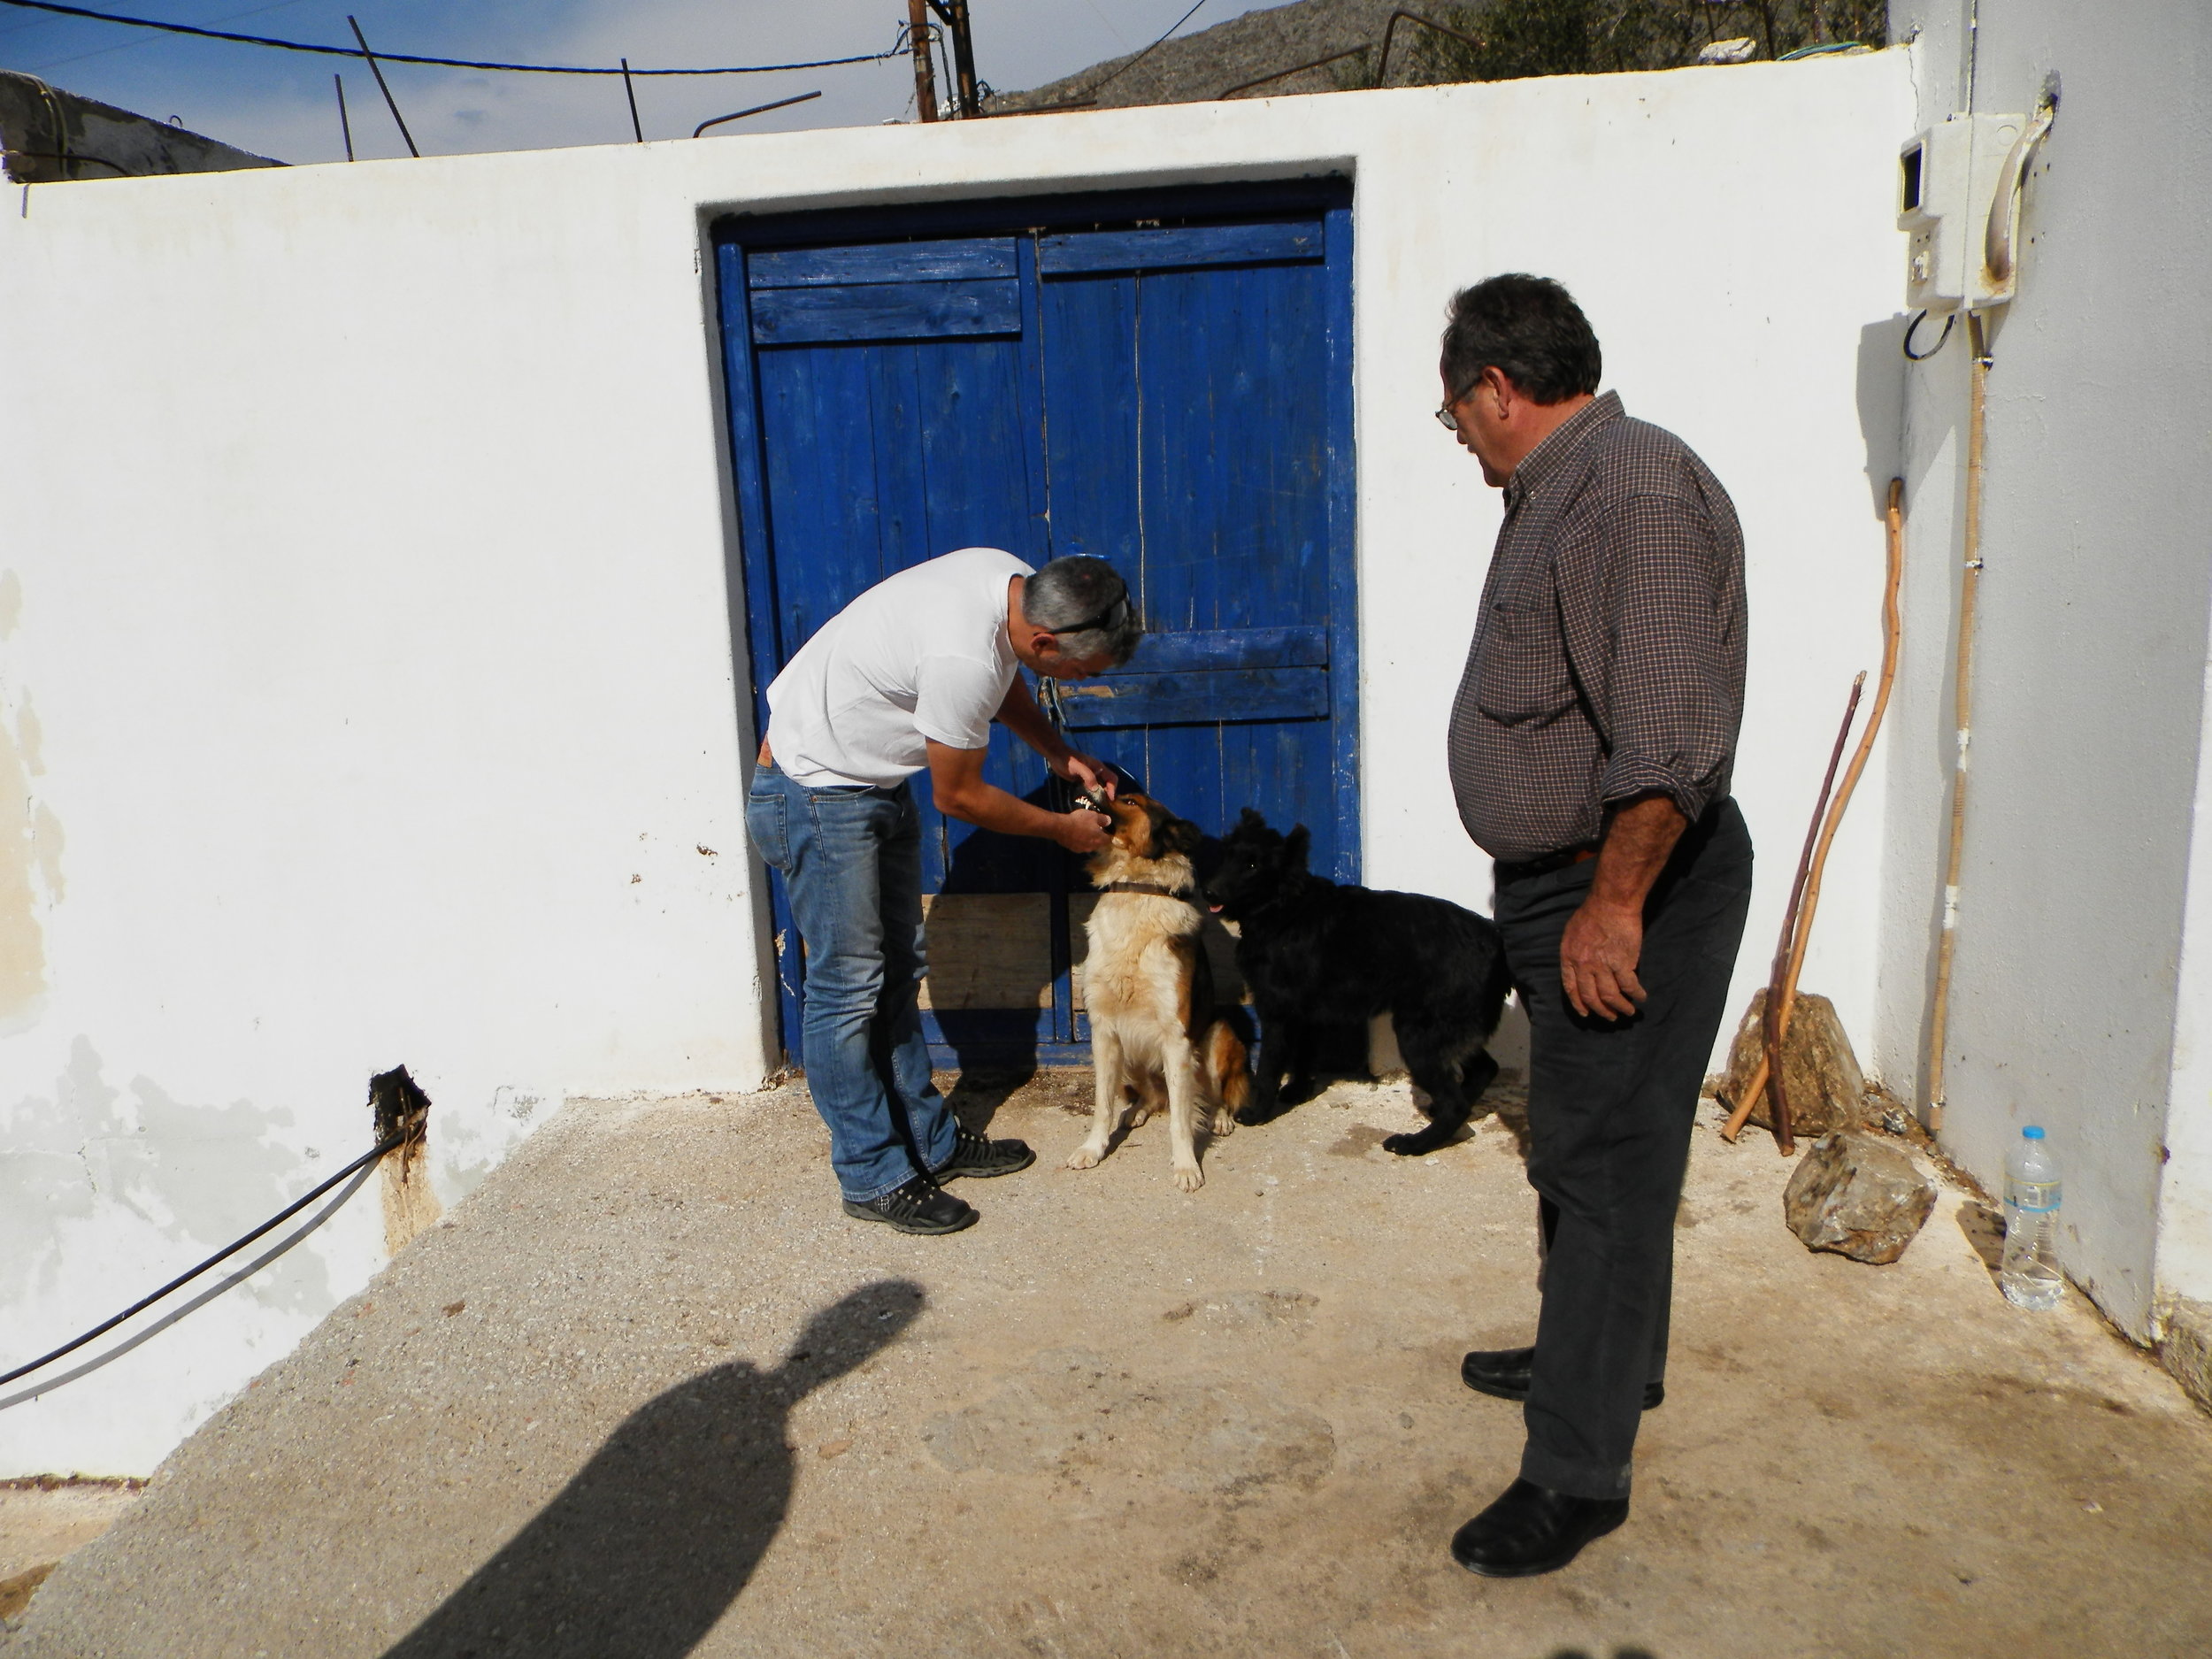   Dr. Manolis Vorisis examines the dogs of Stamatis Simos who brought them for their annual vaccination.  